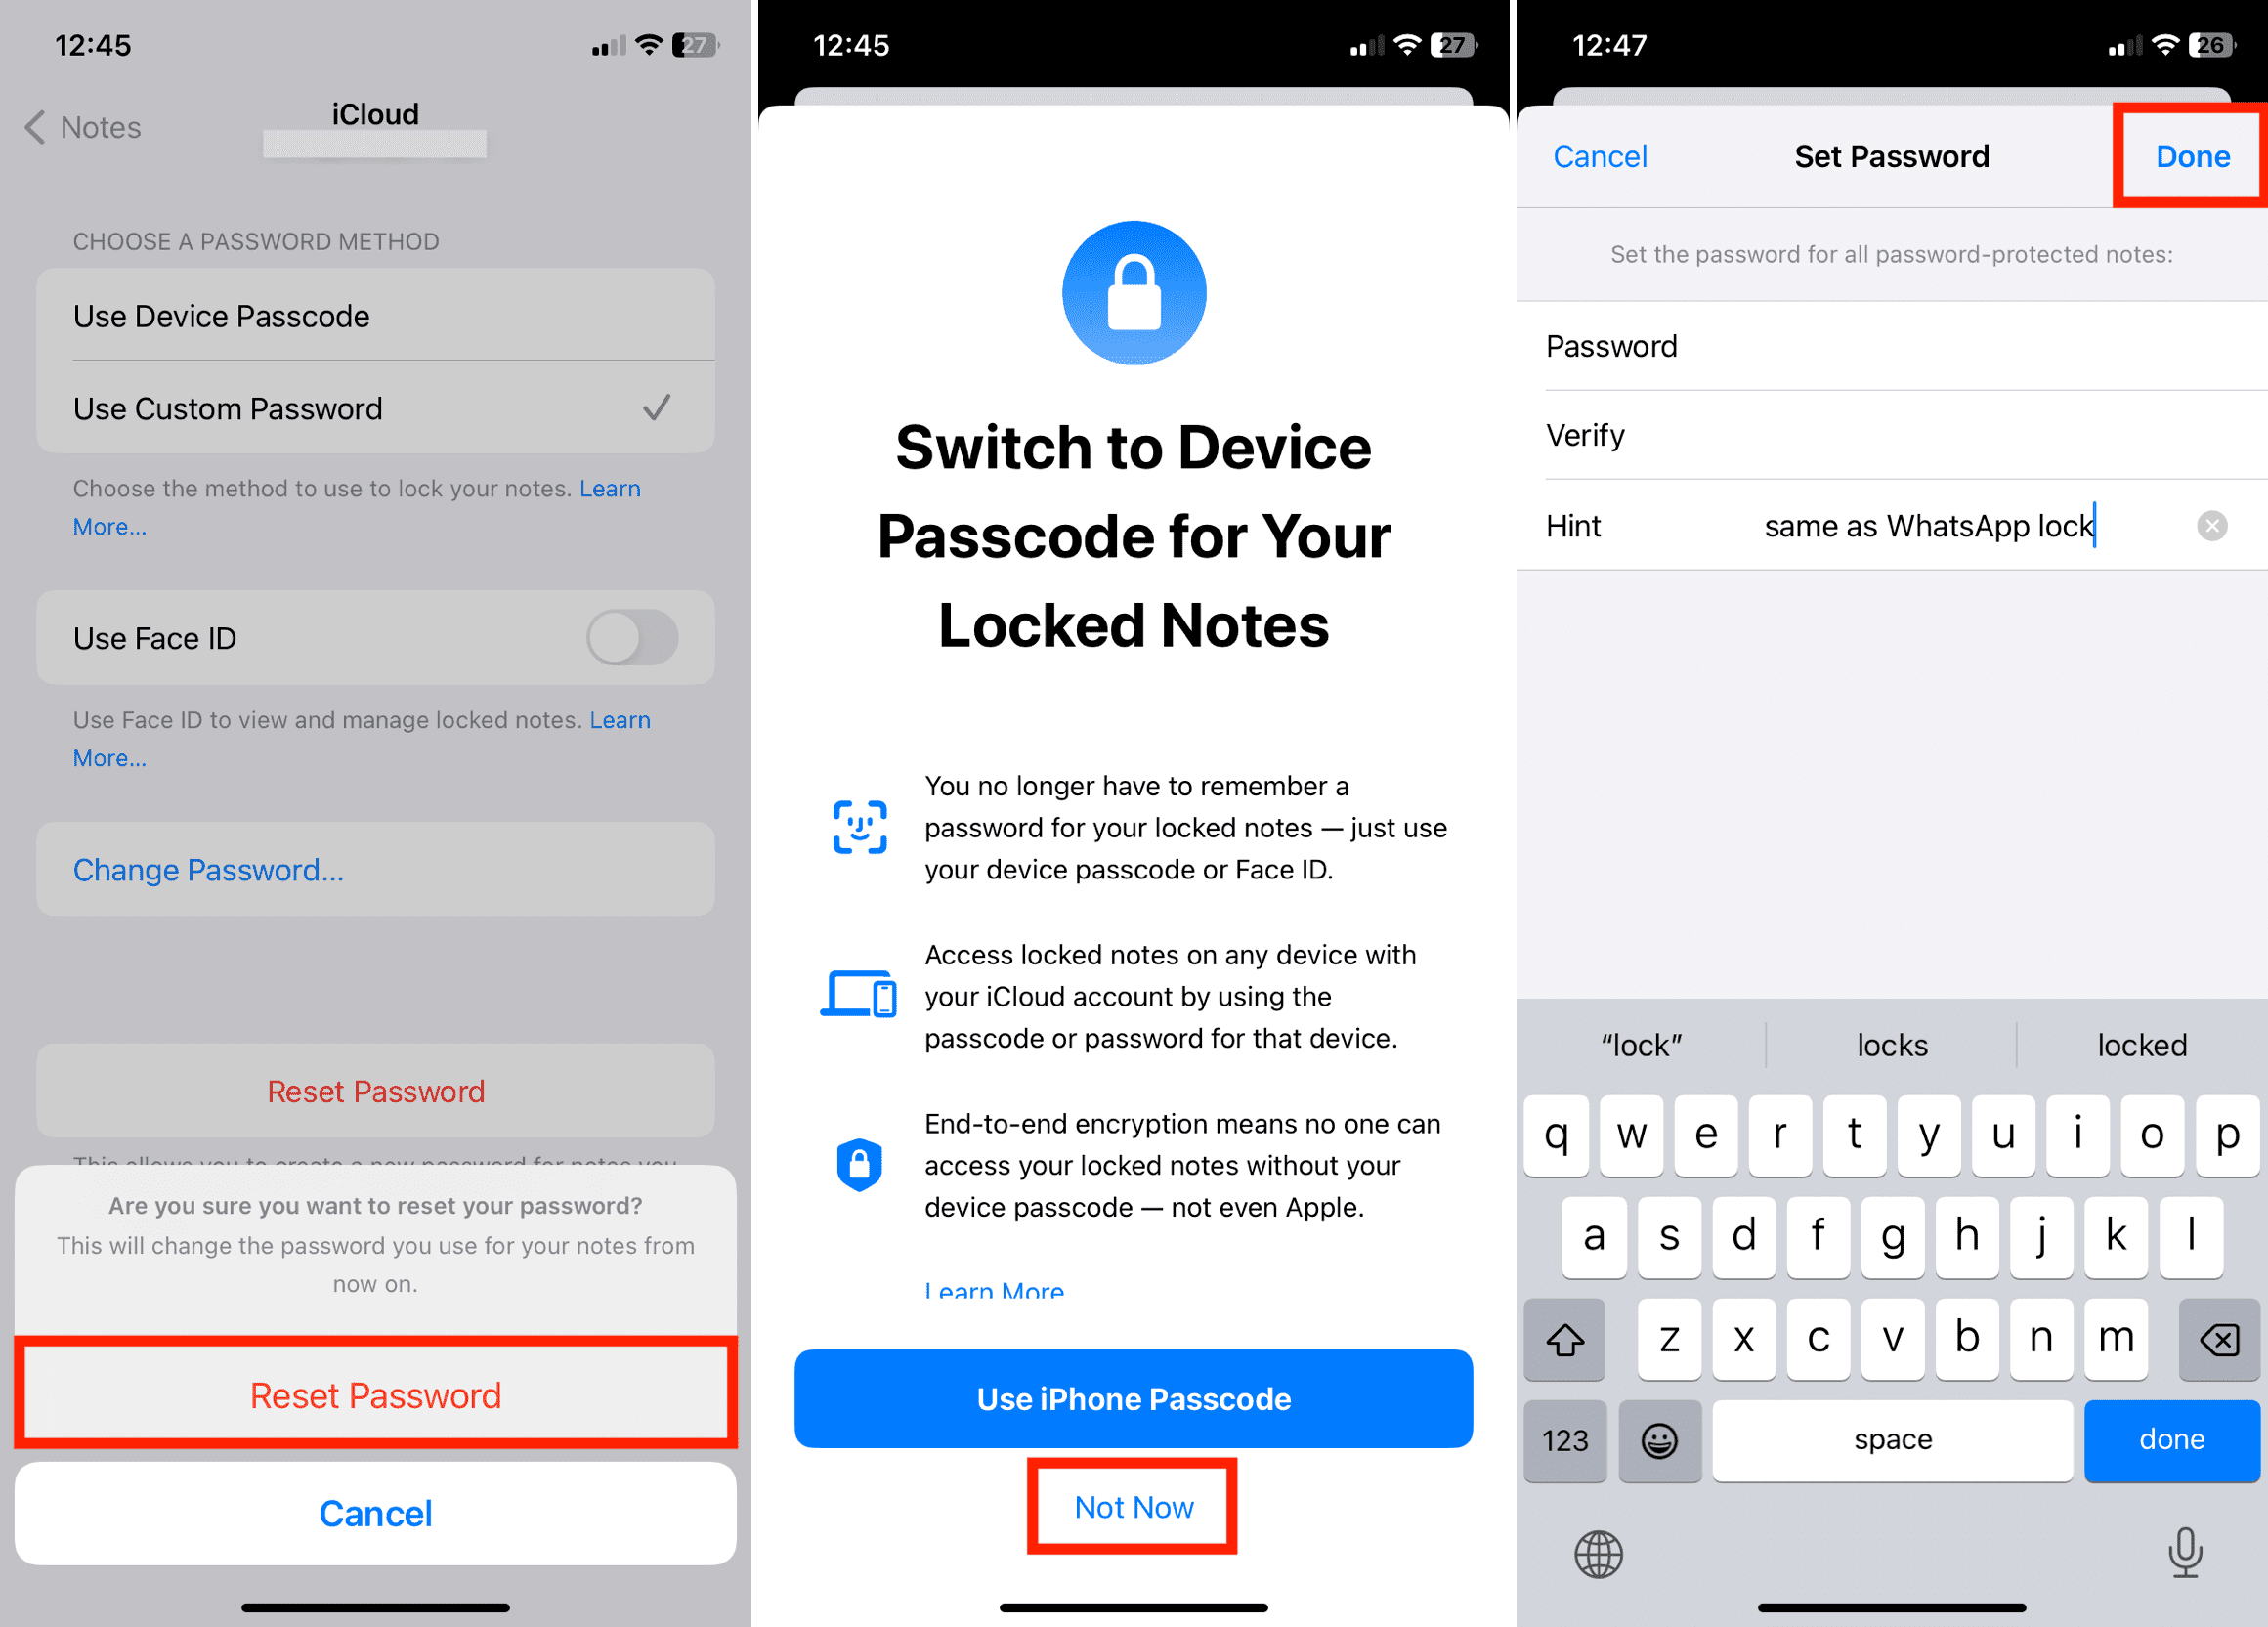 Reset Password for locked notes on iPhone